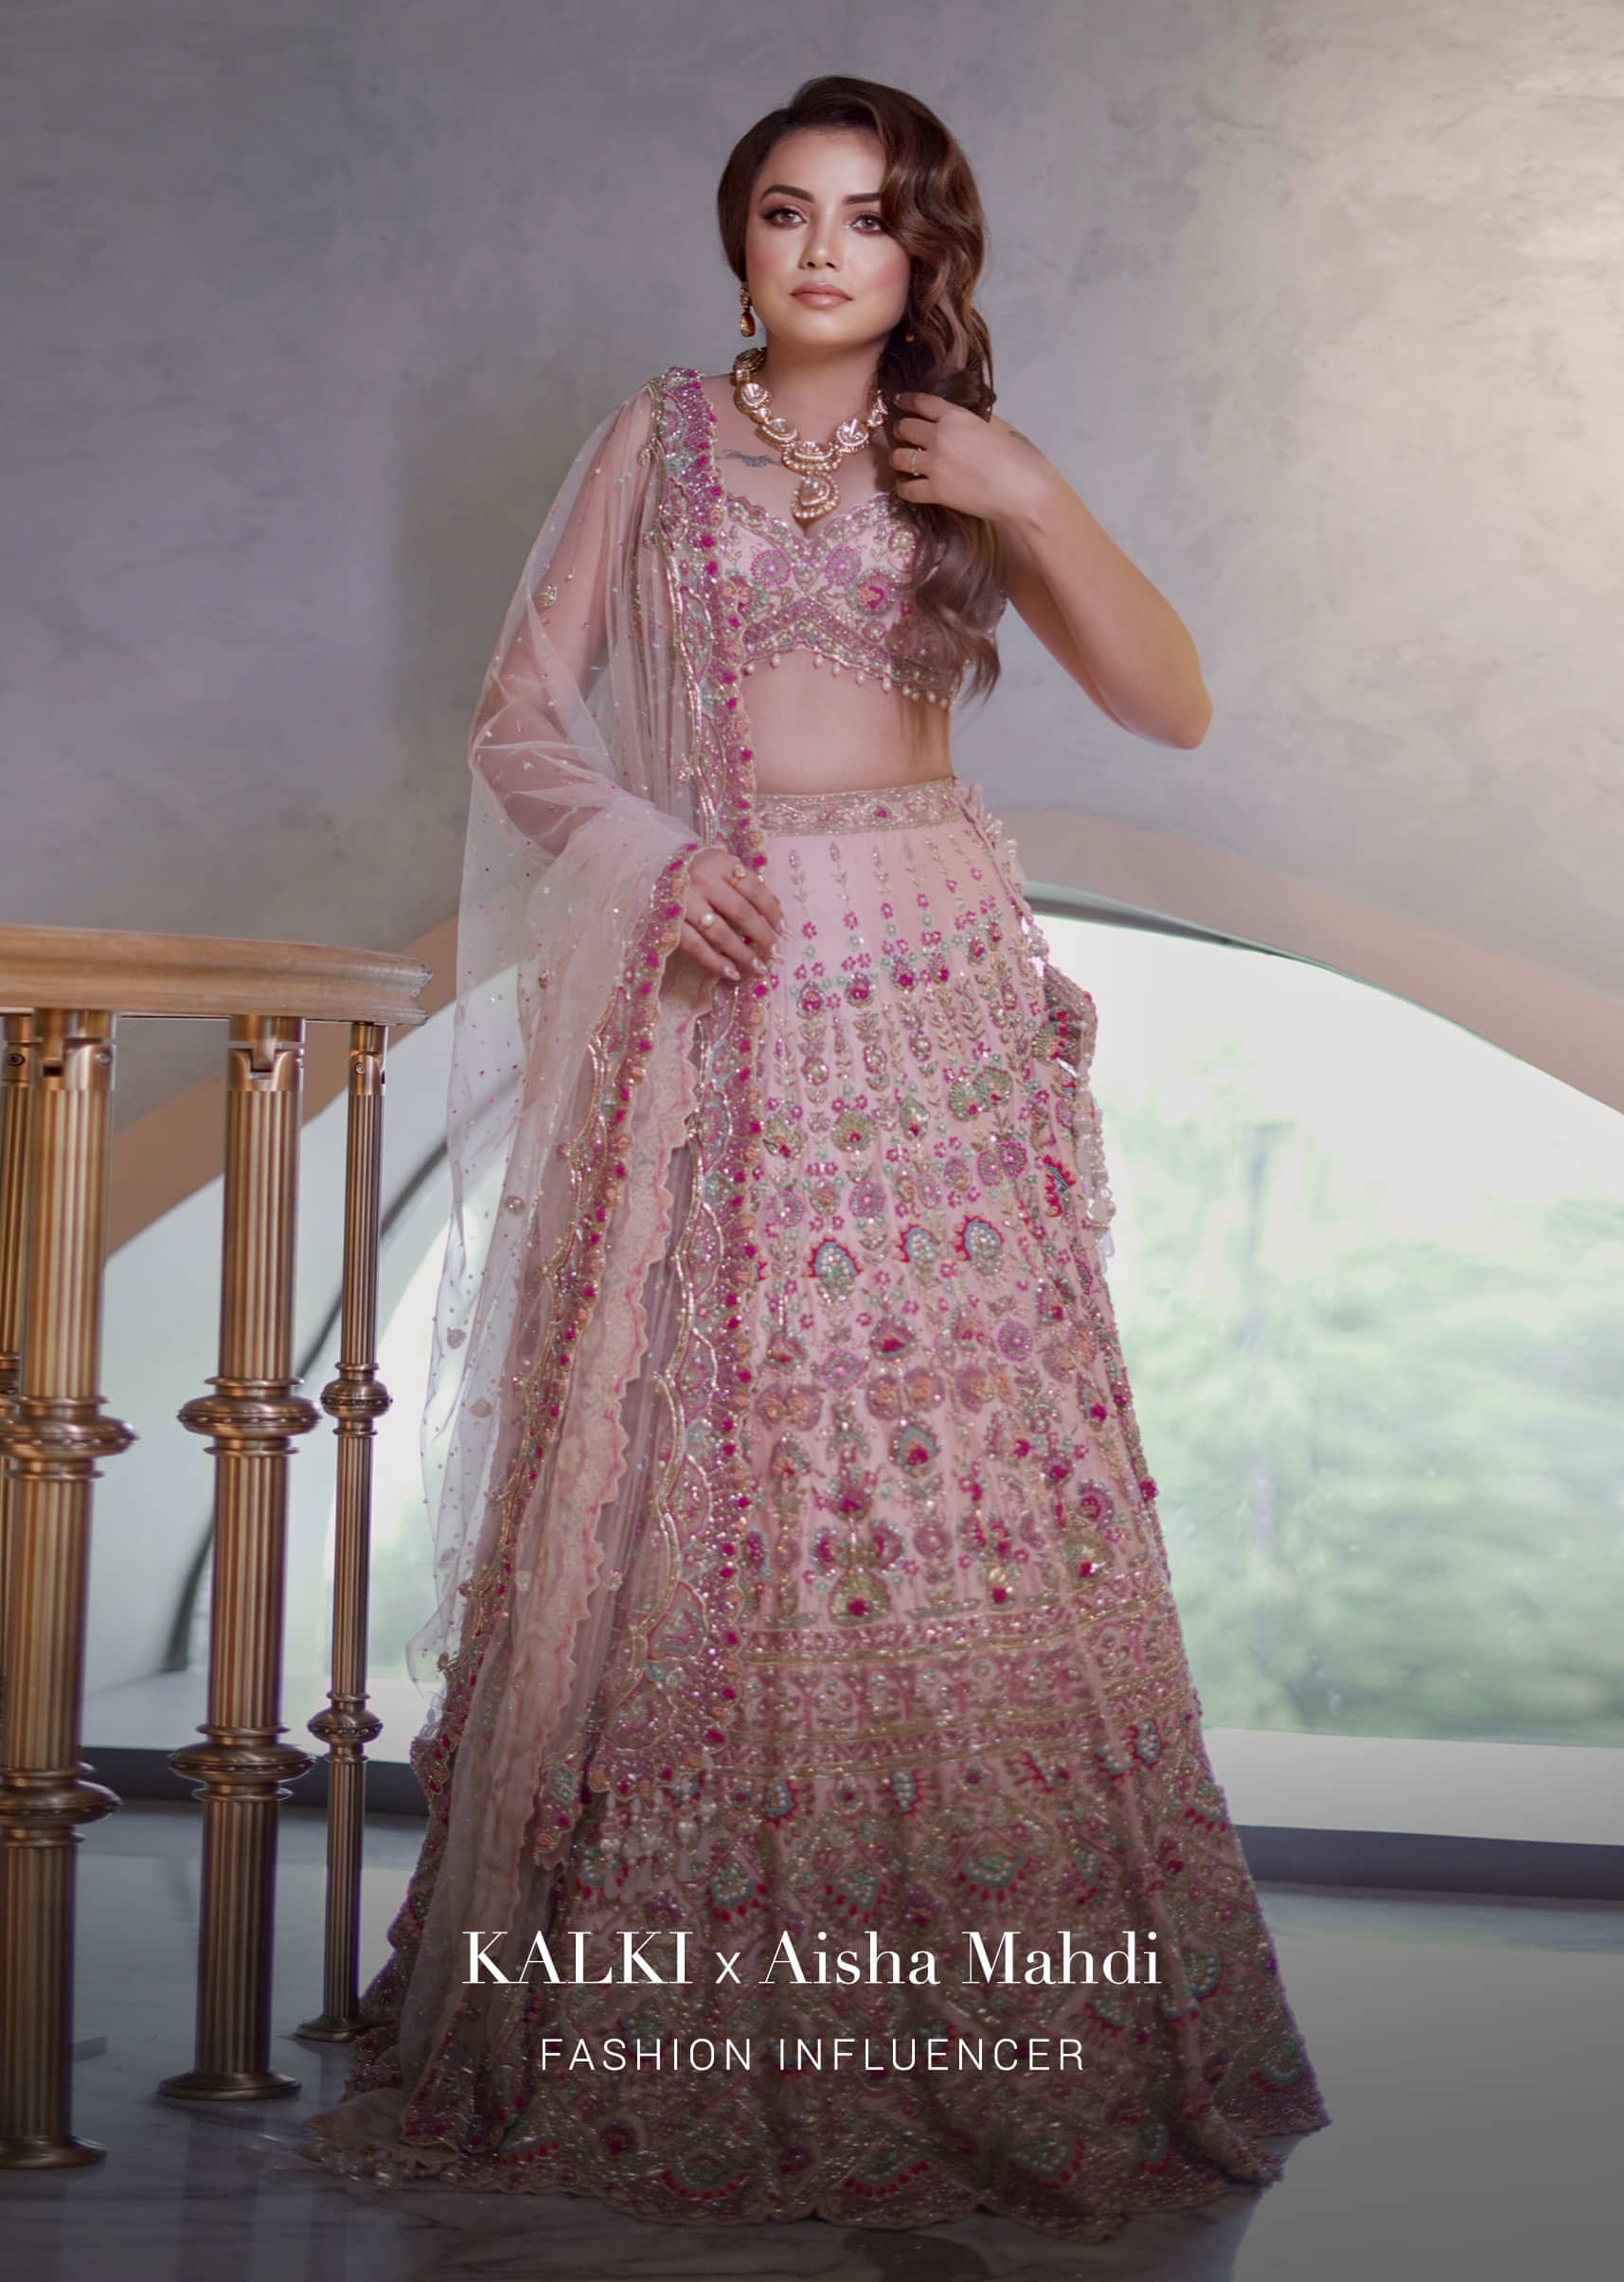 Pastel Pink Lehenga With A Crop Top In Multi-Colored Resham Embroidery, Crop Top Comes In Sleeveless With Scalloped Neckline